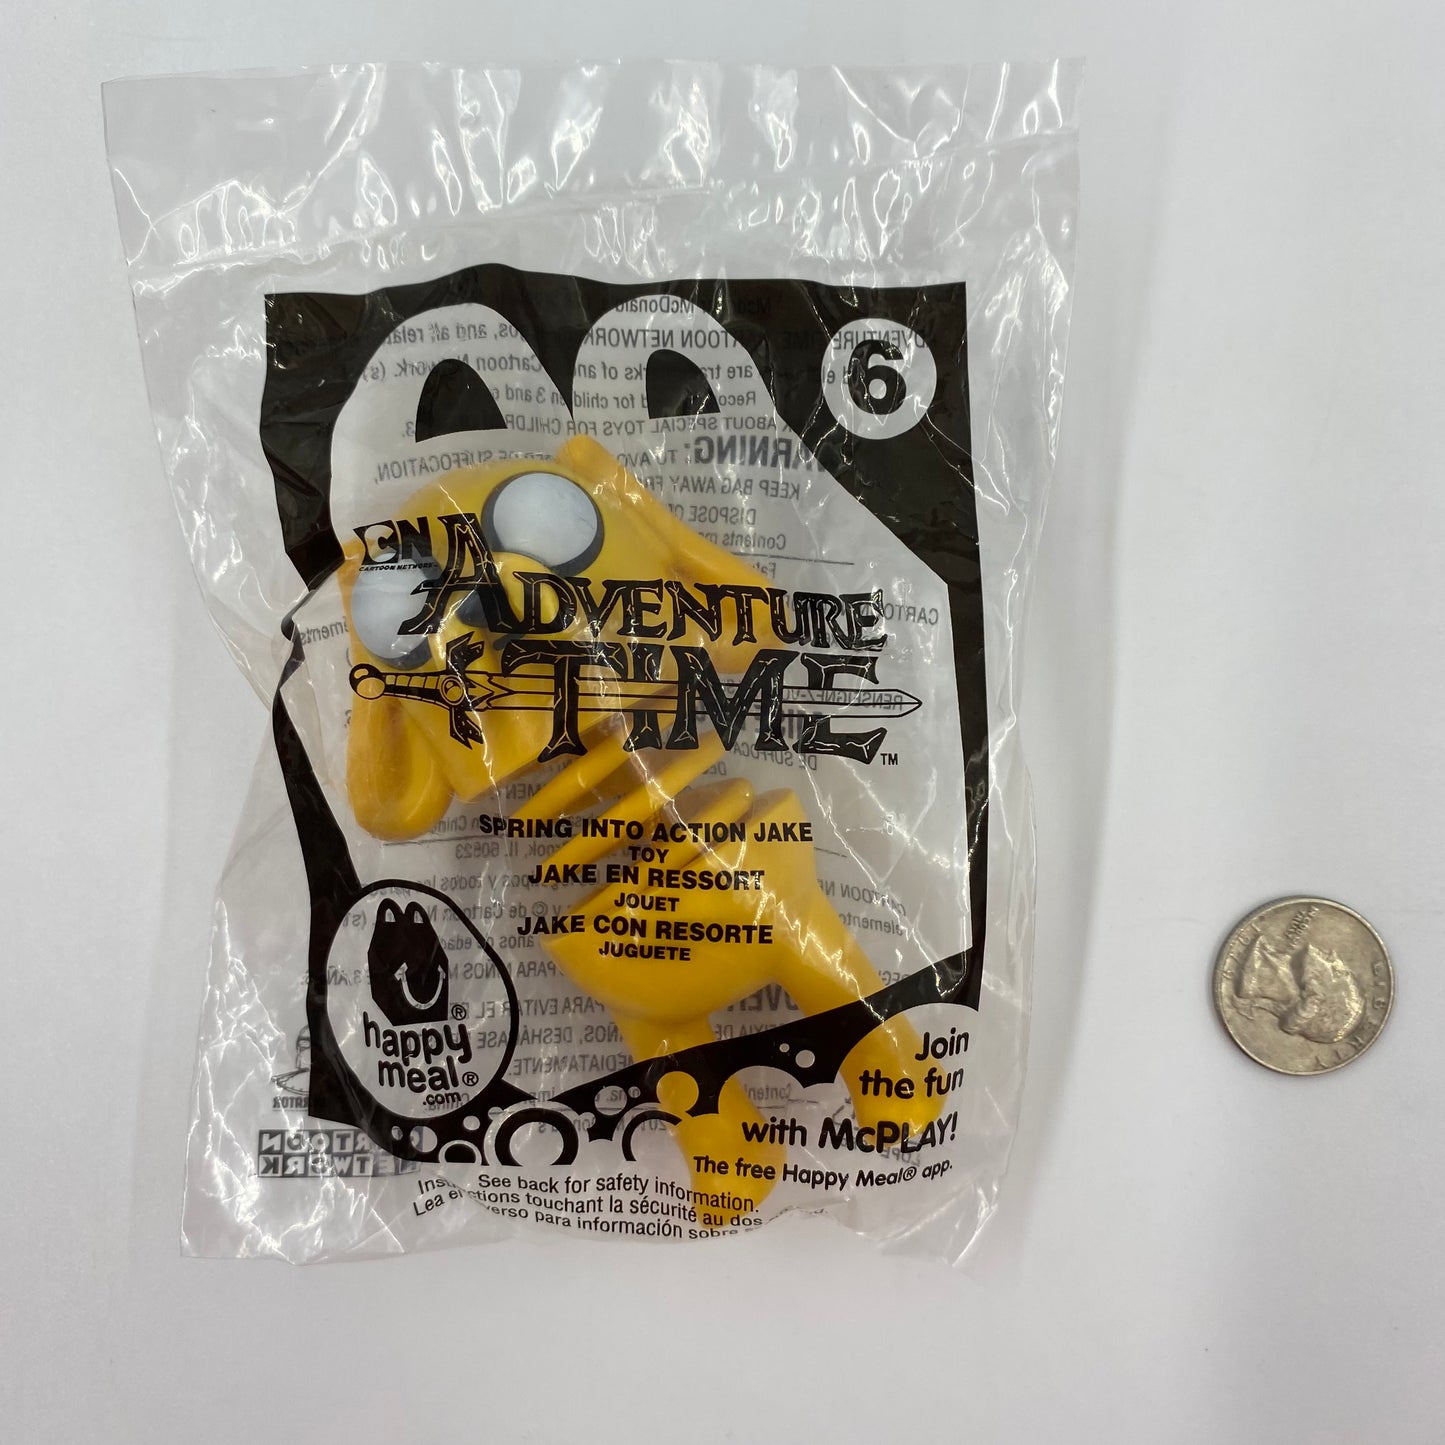 Adventure Time Spring Into Action Jake McDonald's Happy Meal toy (2014) bagged